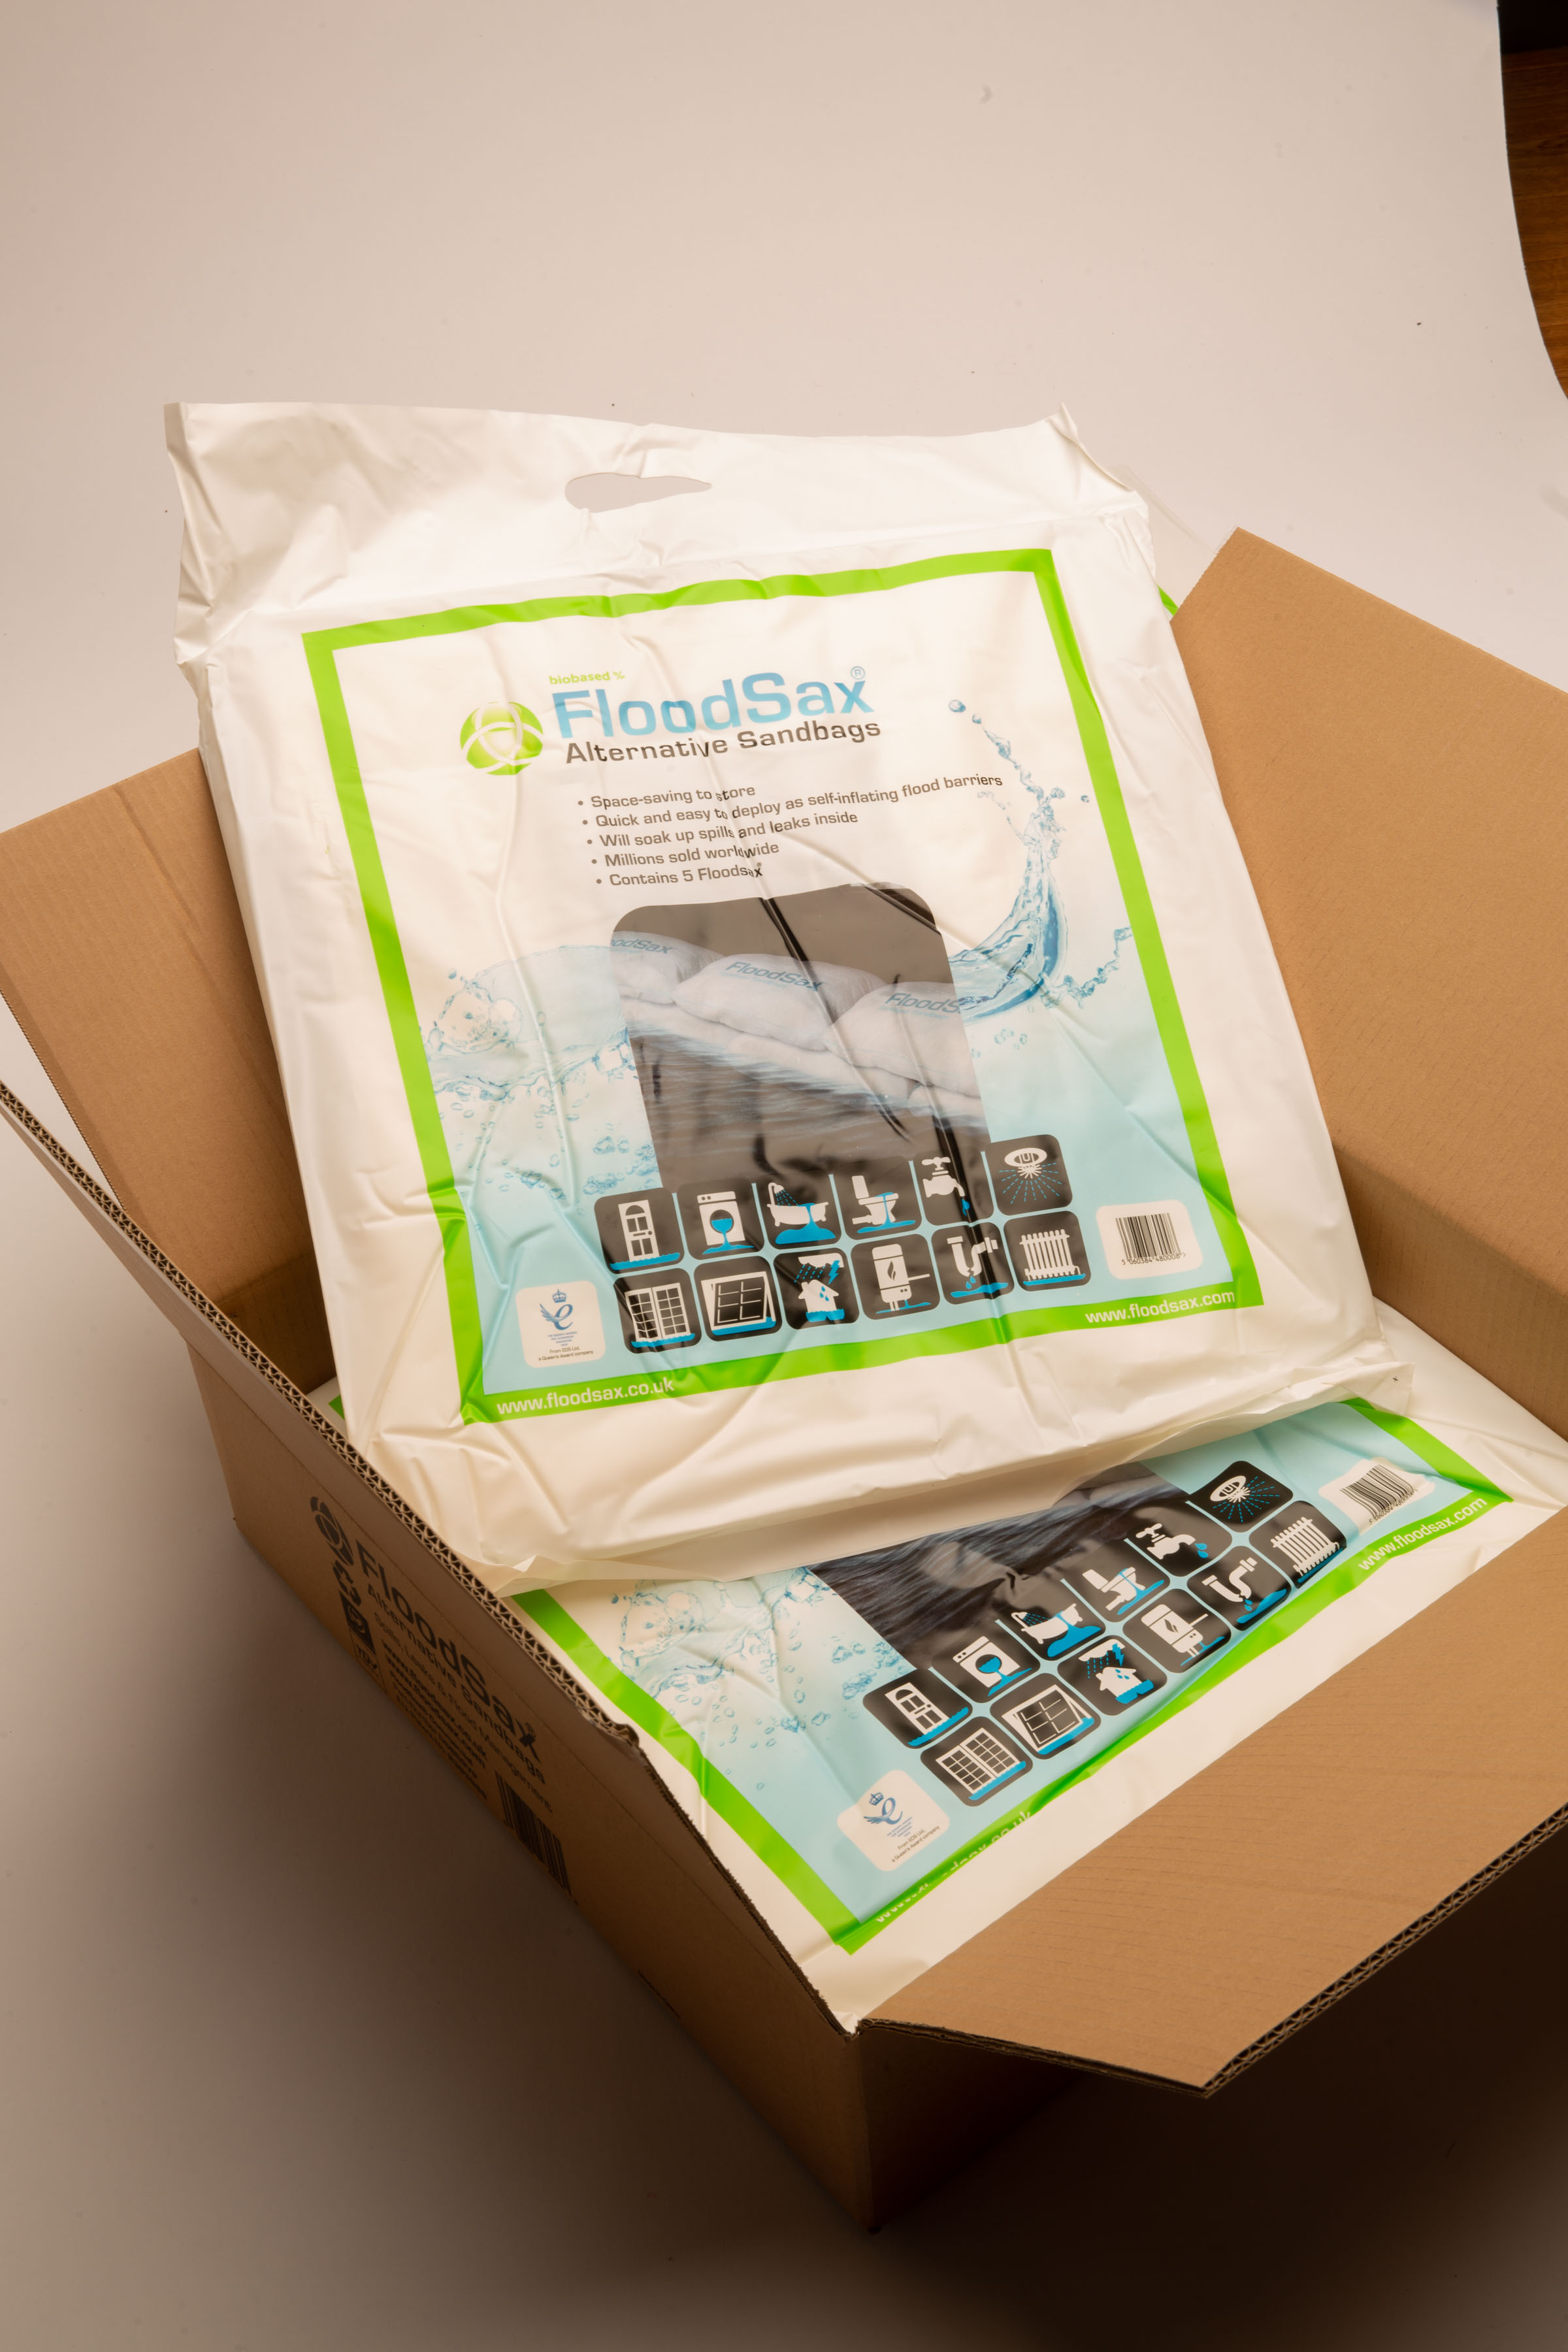 Pack of FloodSax in its box